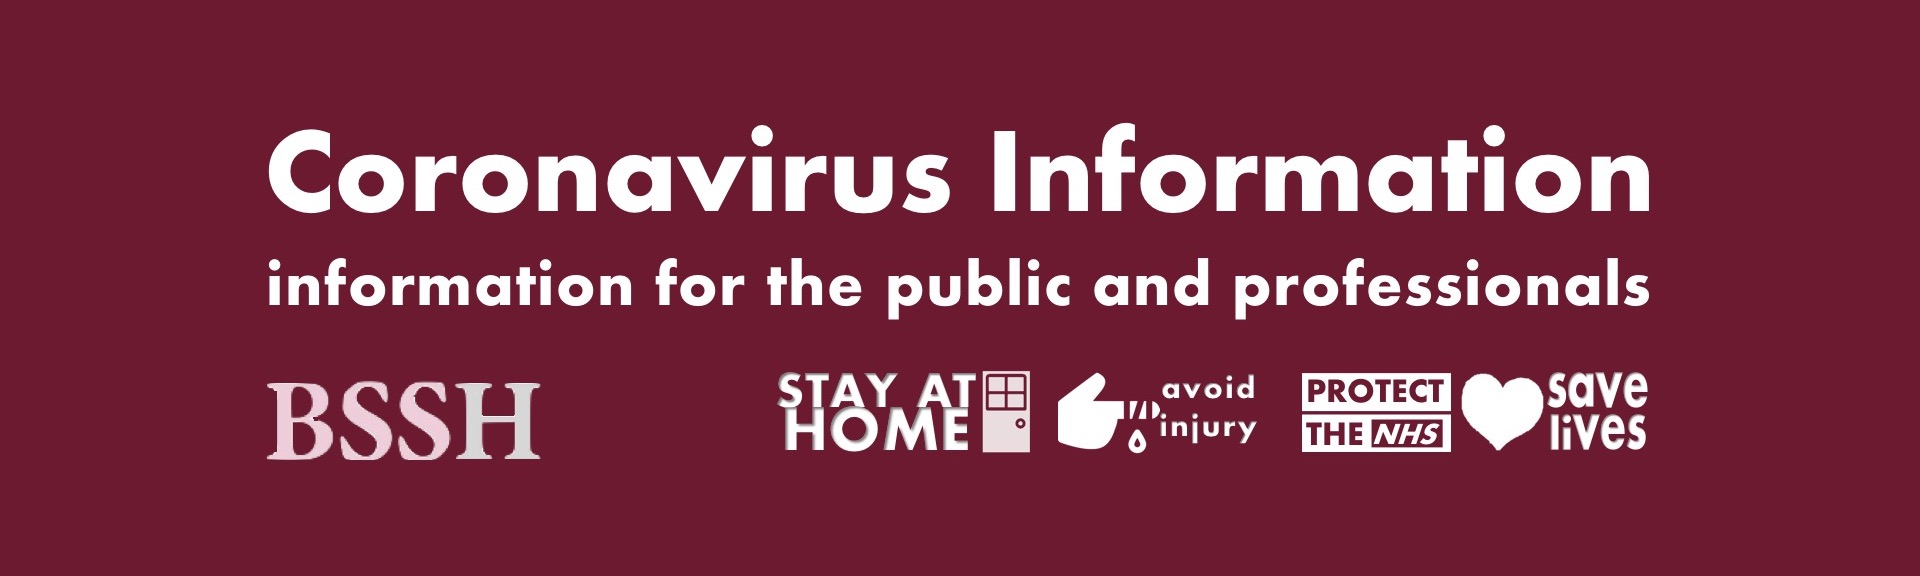 Coronavirus Information - resources for the public and professionals